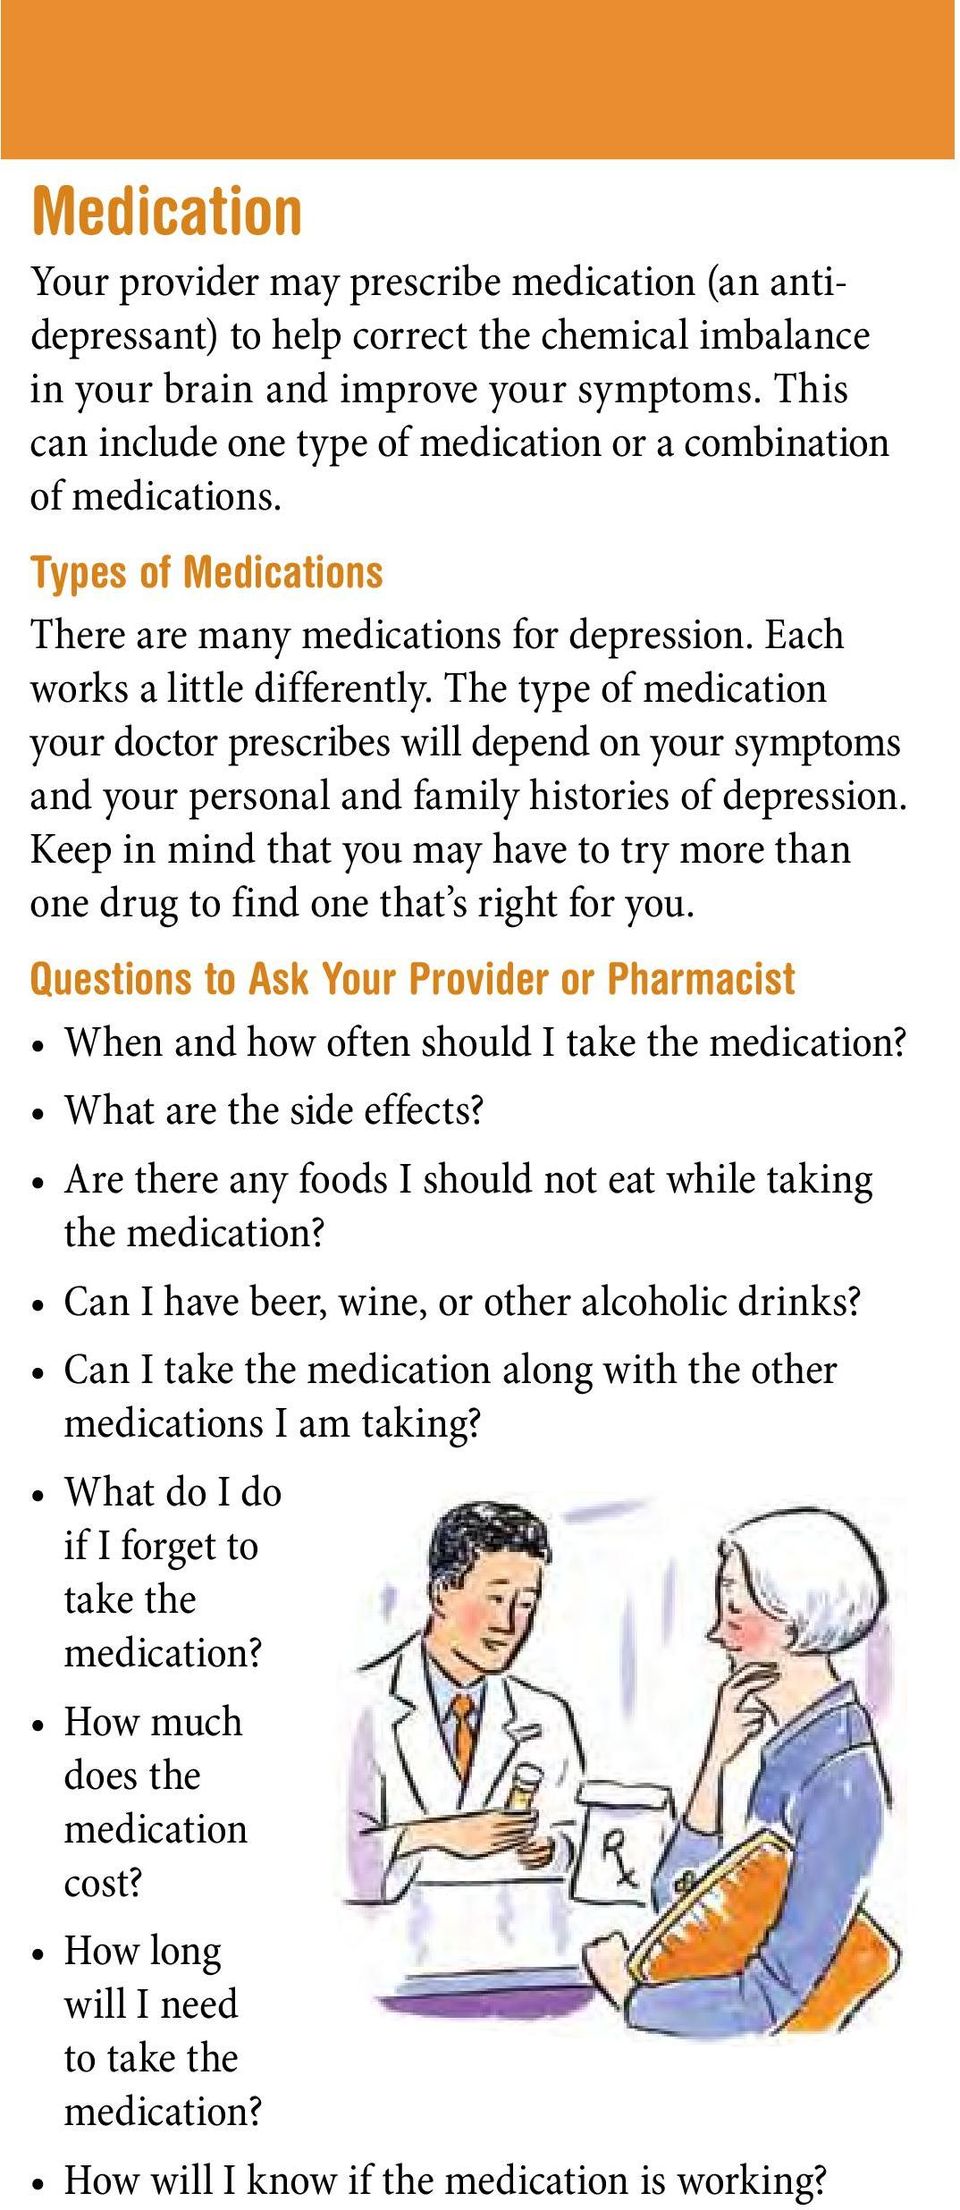 The type of medication your doctor prescribes will depend on your symptoms and your personal and family histories of depression.